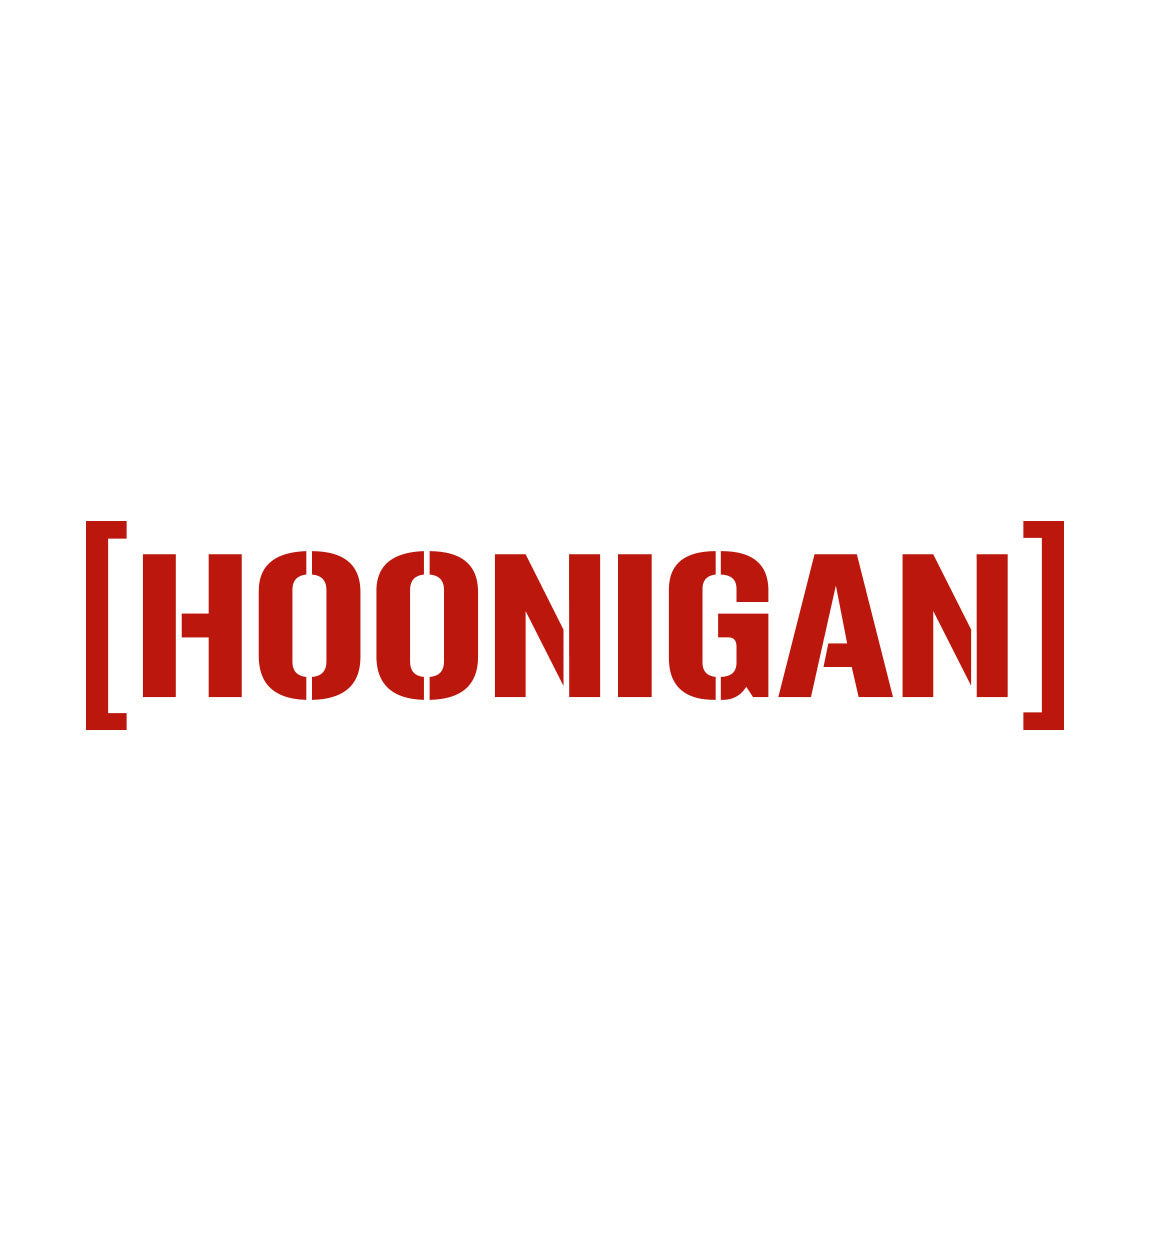 Fichier:Hoonigan Racing Division logo.png — Wikipédia